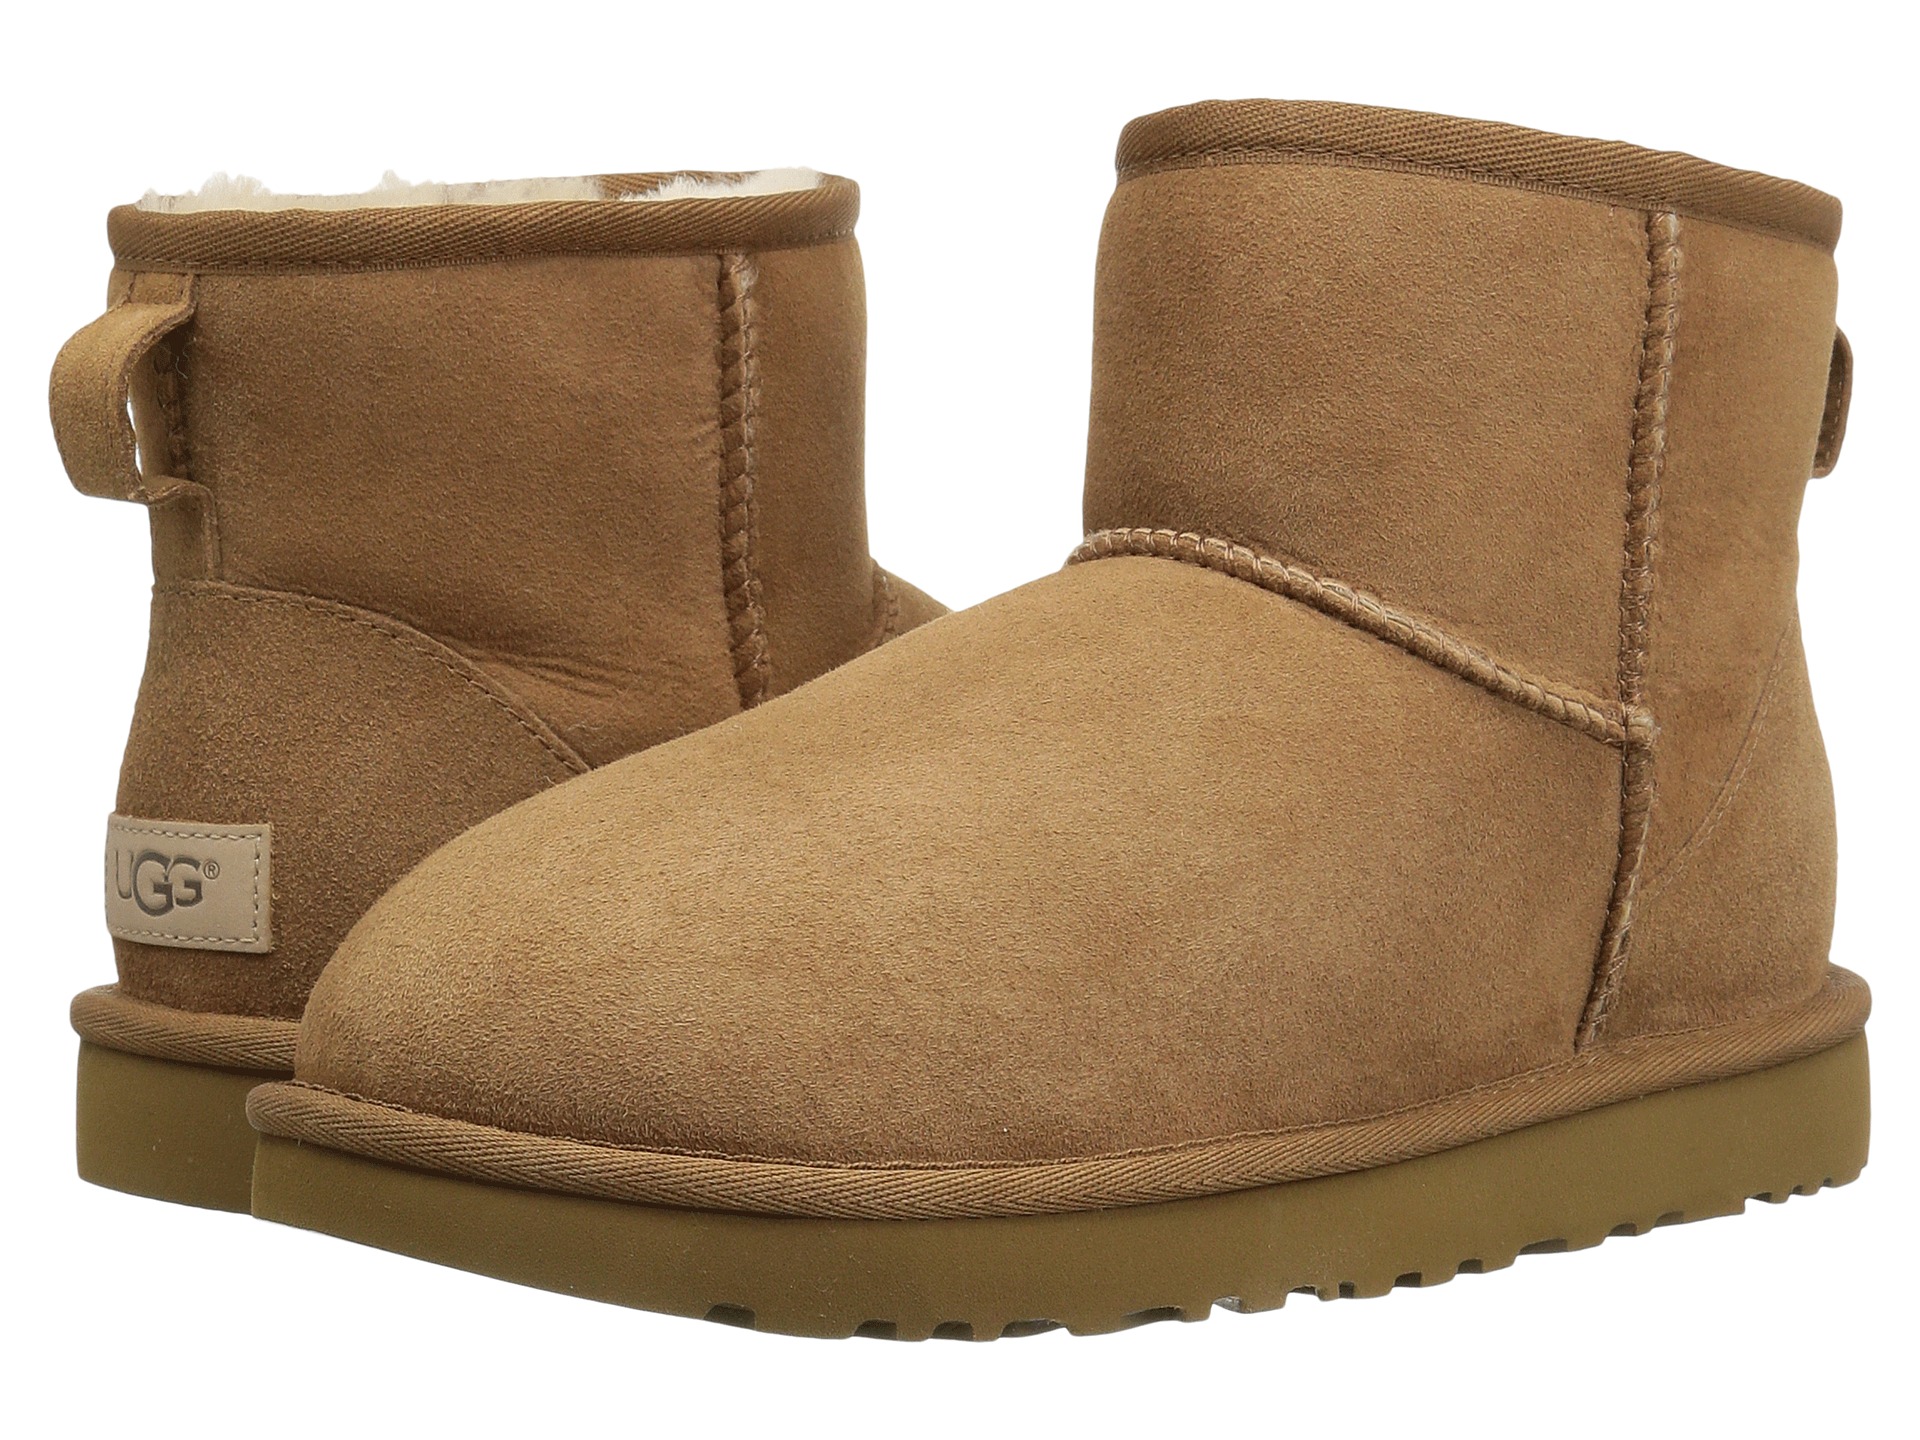 Ugg Classic Mini Boots | Division of Global Affairs